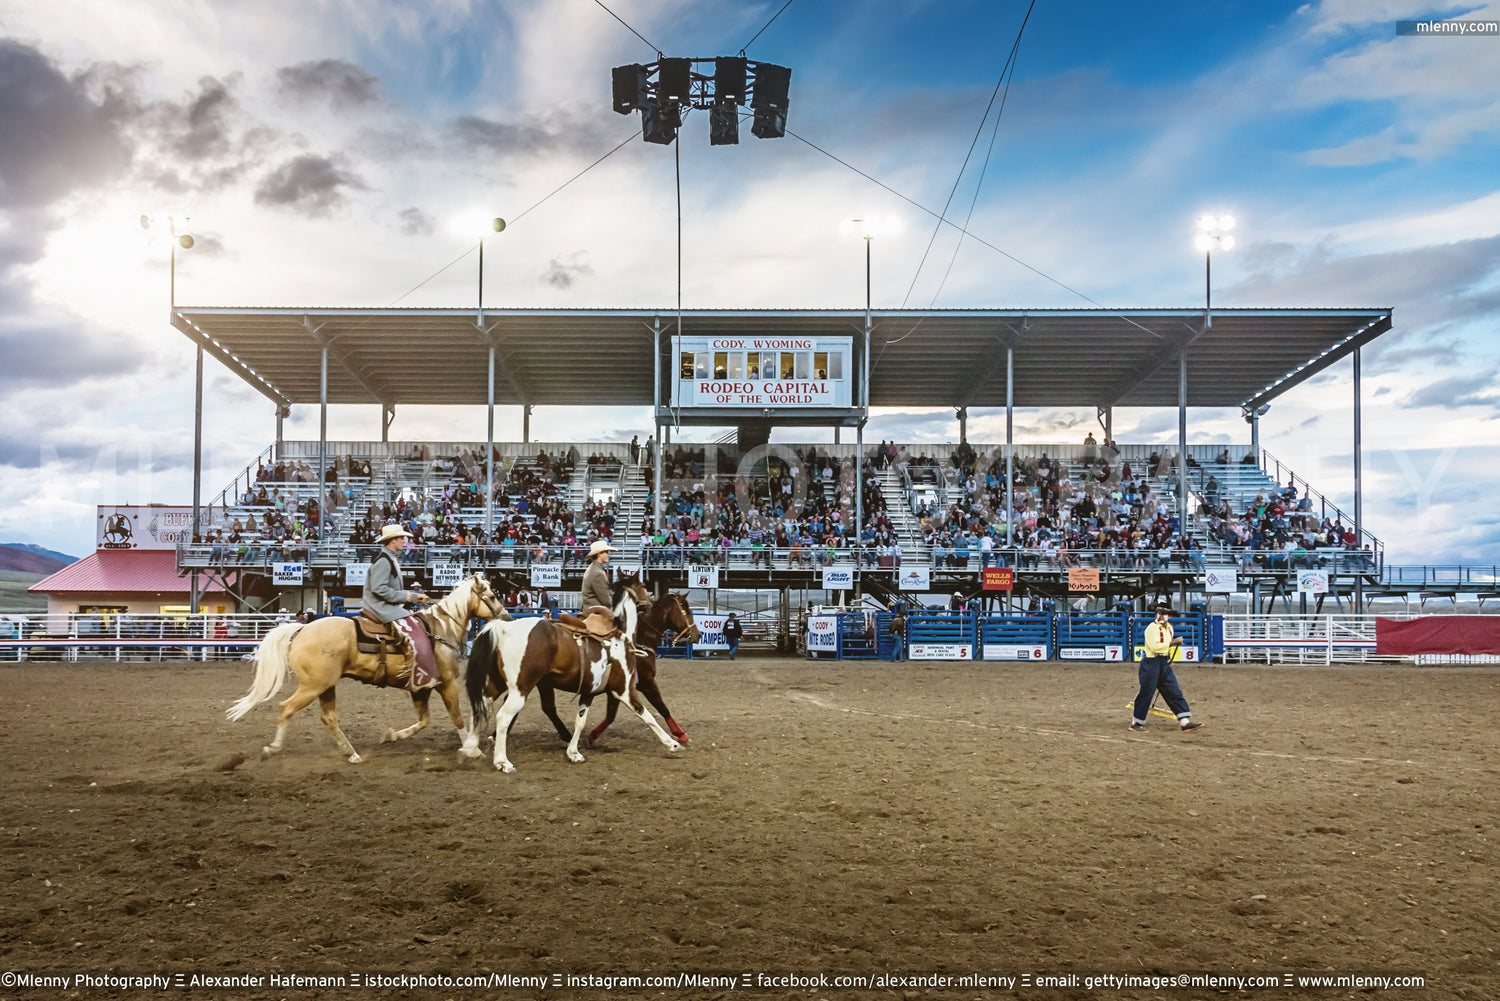 What Are The Most Famous Rodeo Arenas In Wyoming?